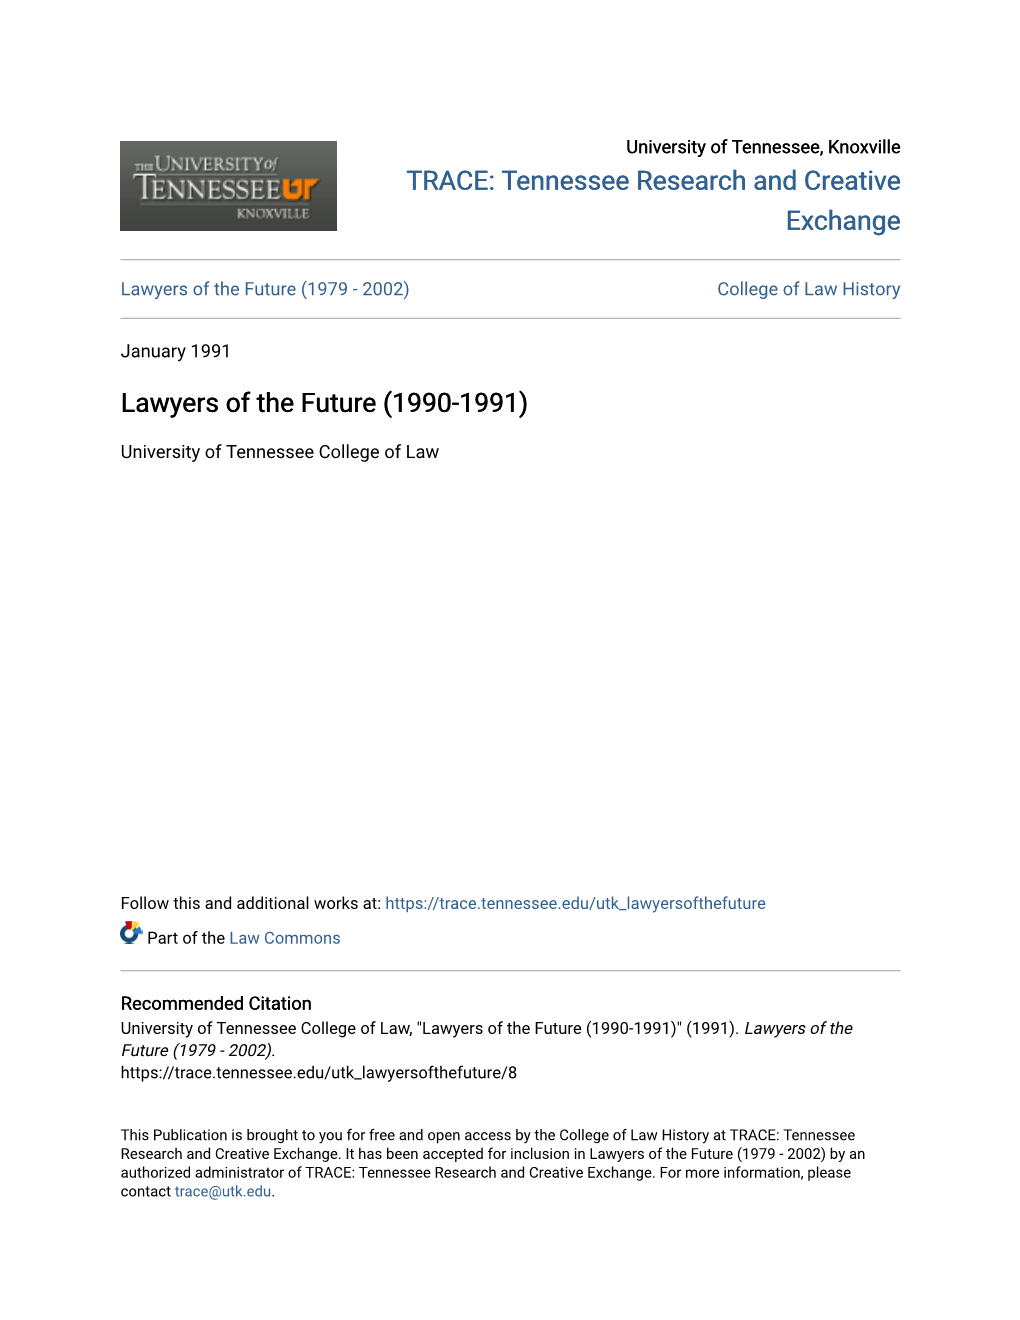 Lawyers of the Future (1979 - 2002) College of Law History